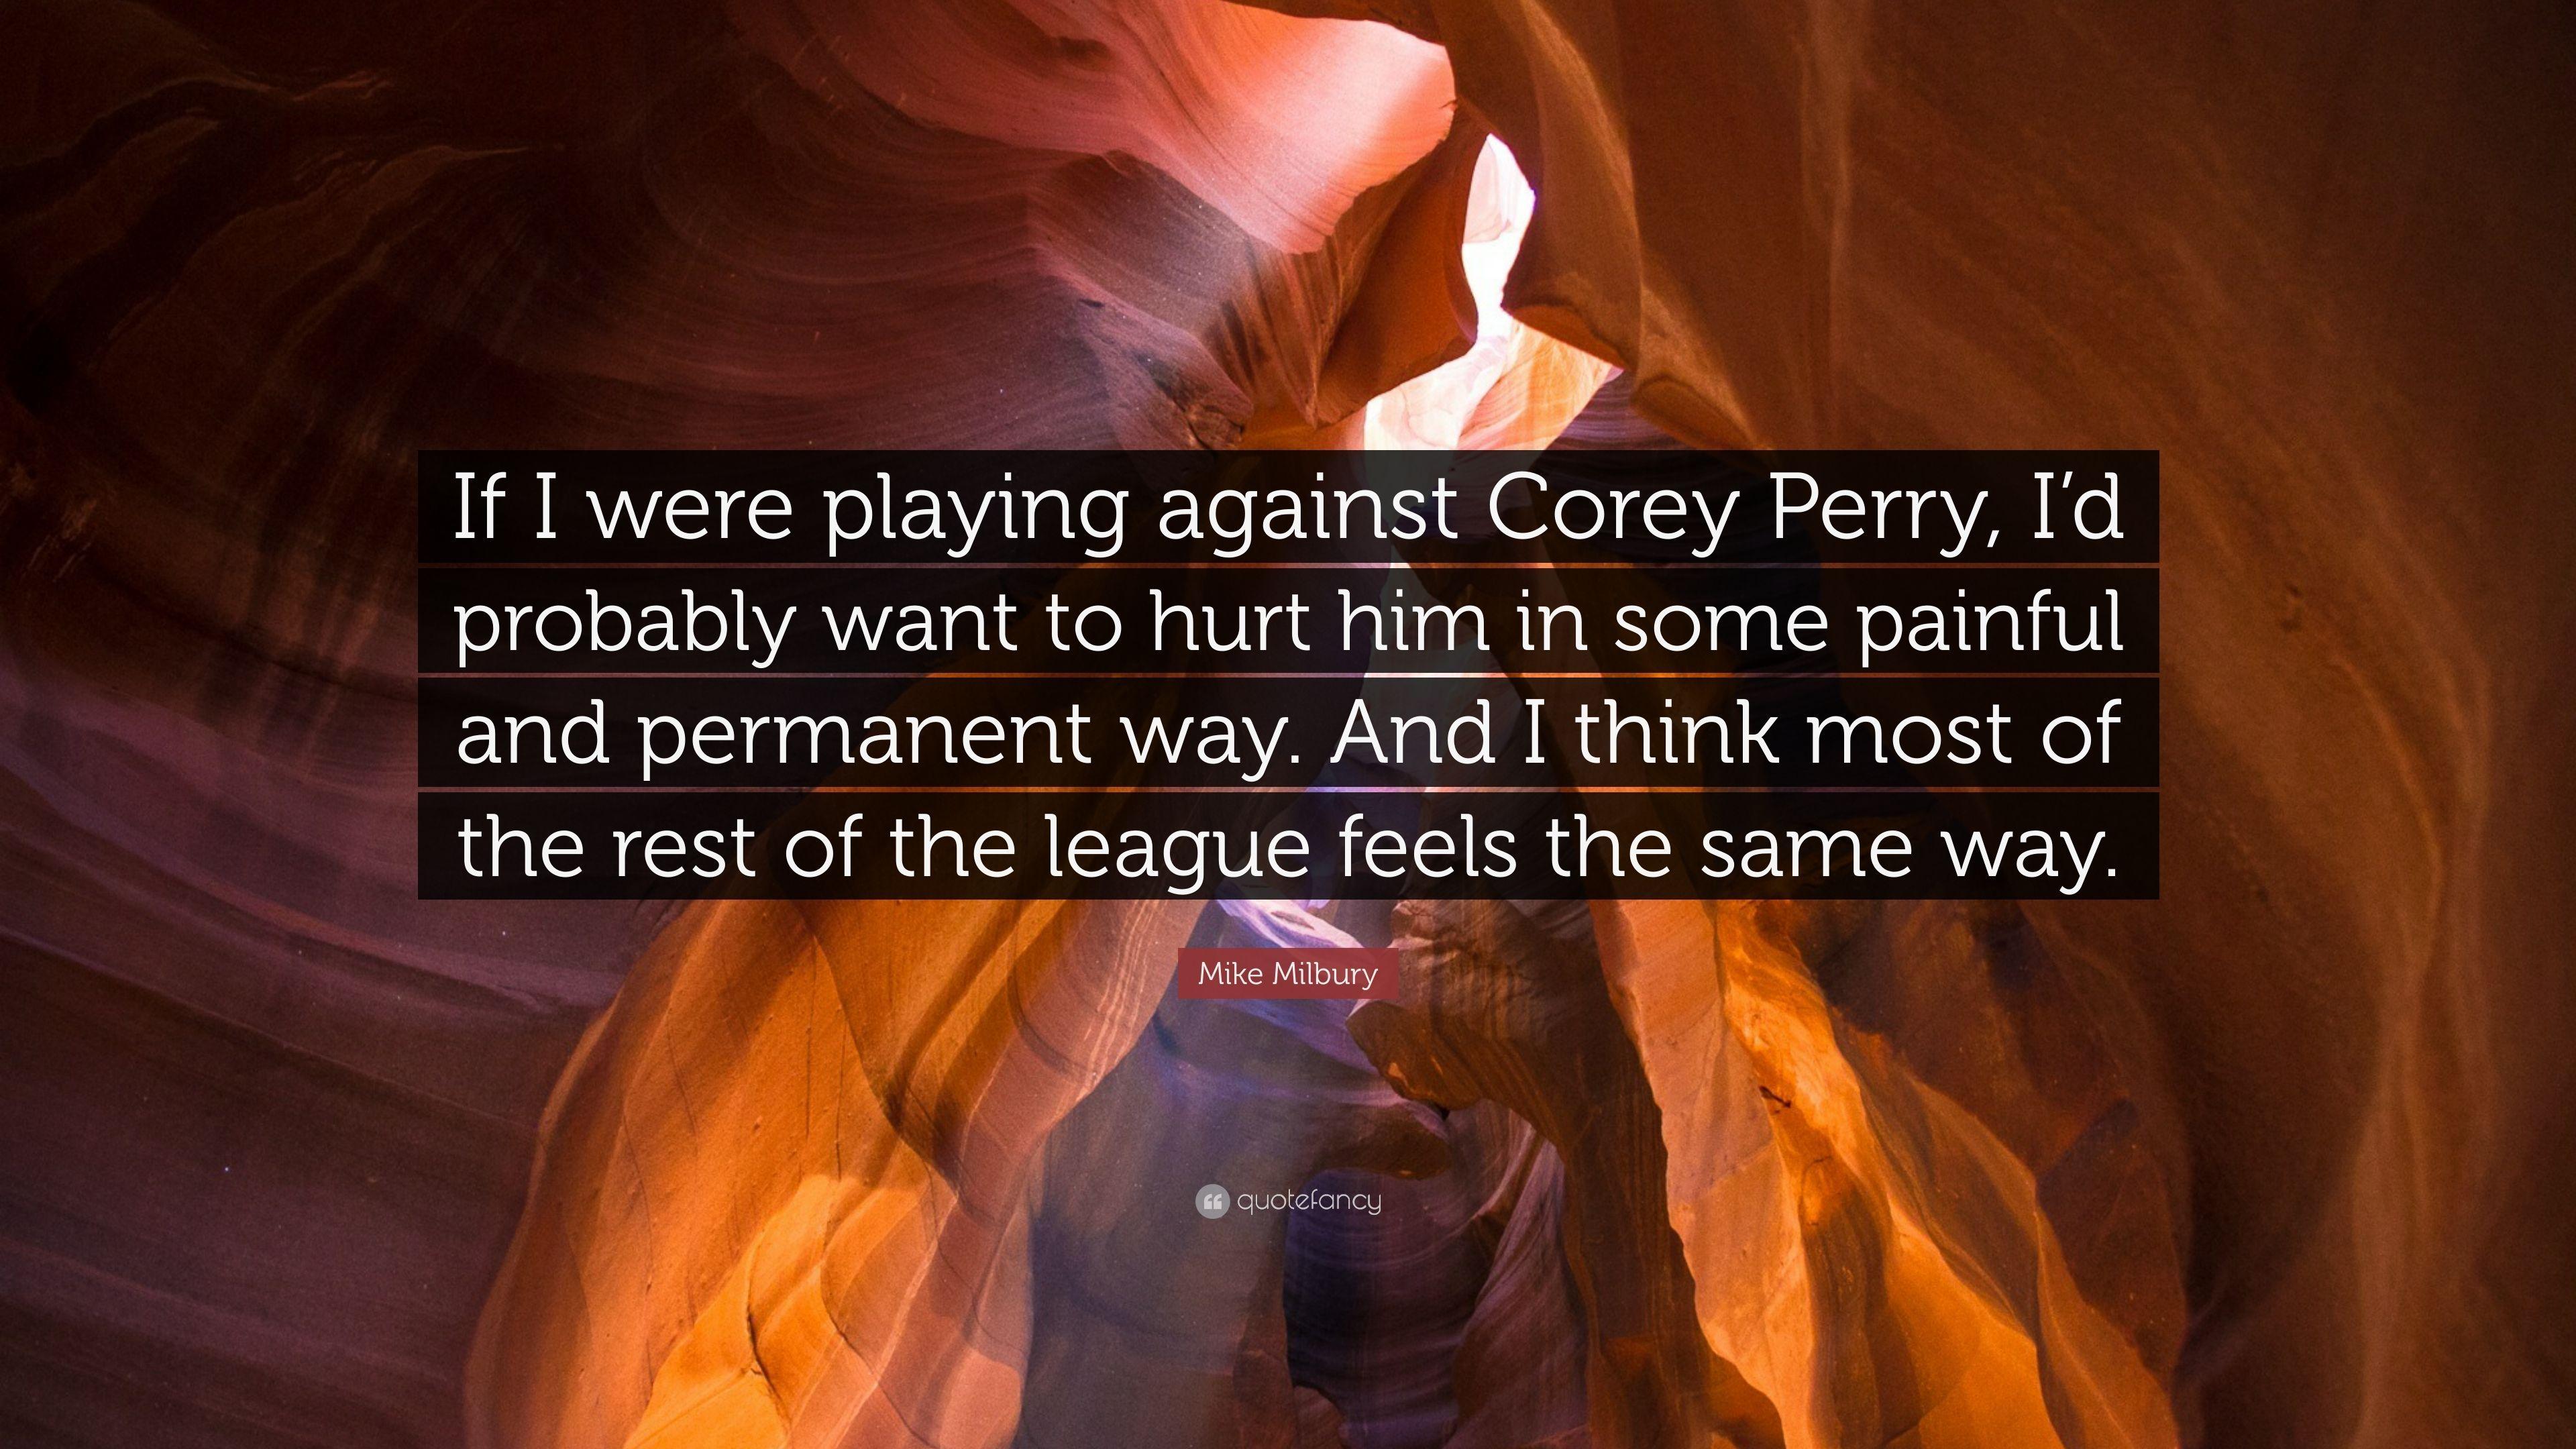 Mike Milbury Quote: “If I were playing against Corey Perry, I'd